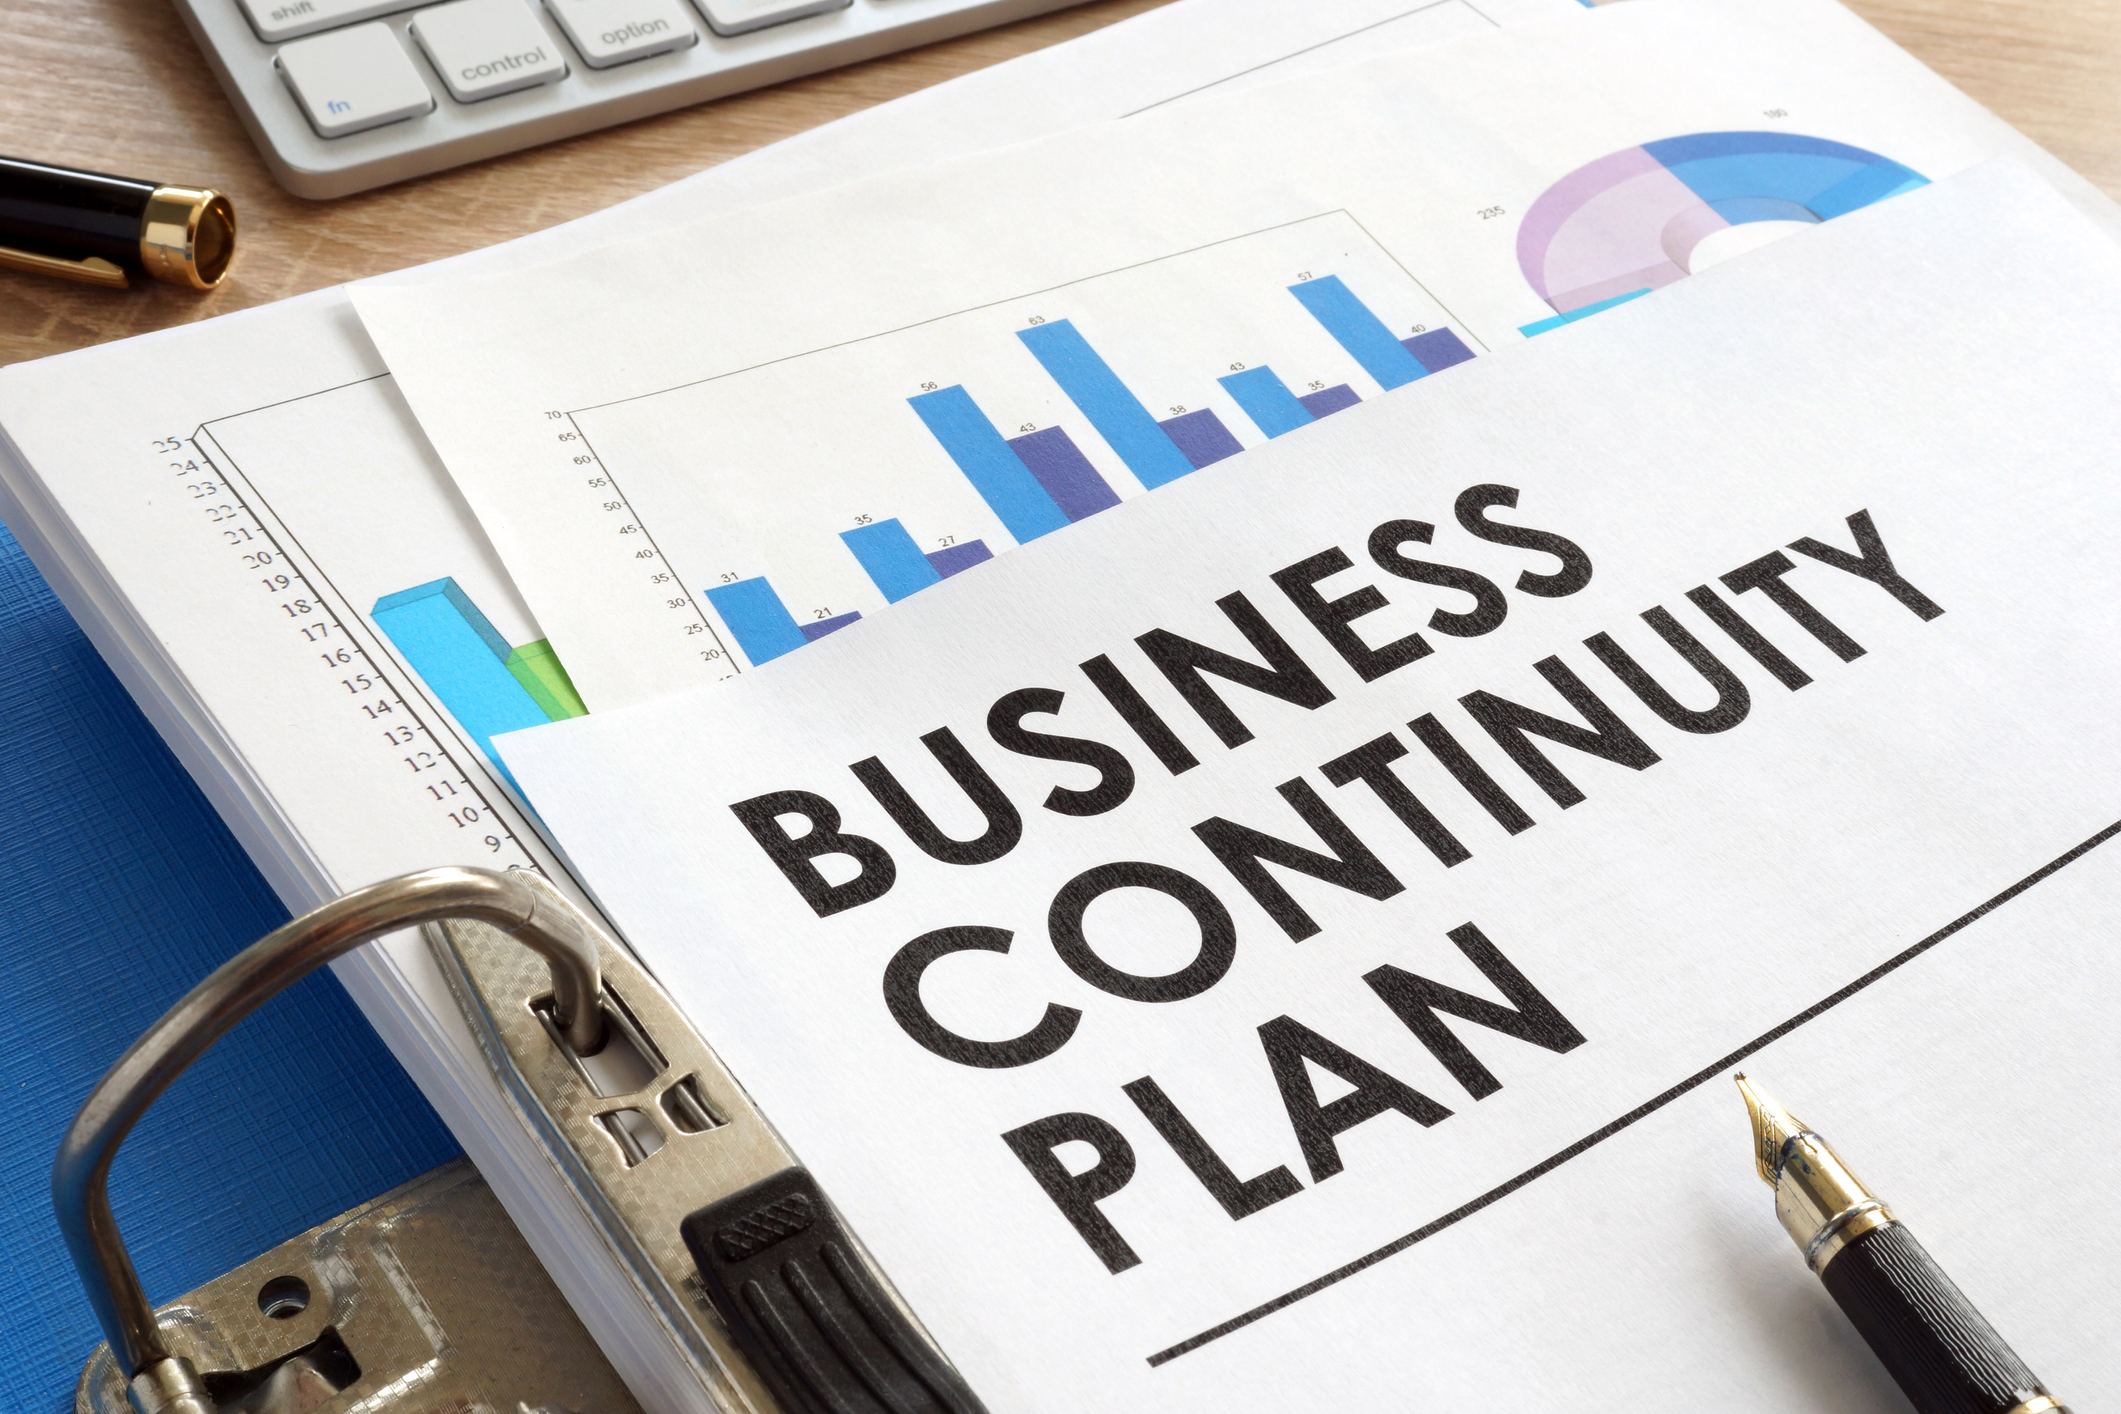 advantages of business continuity plan